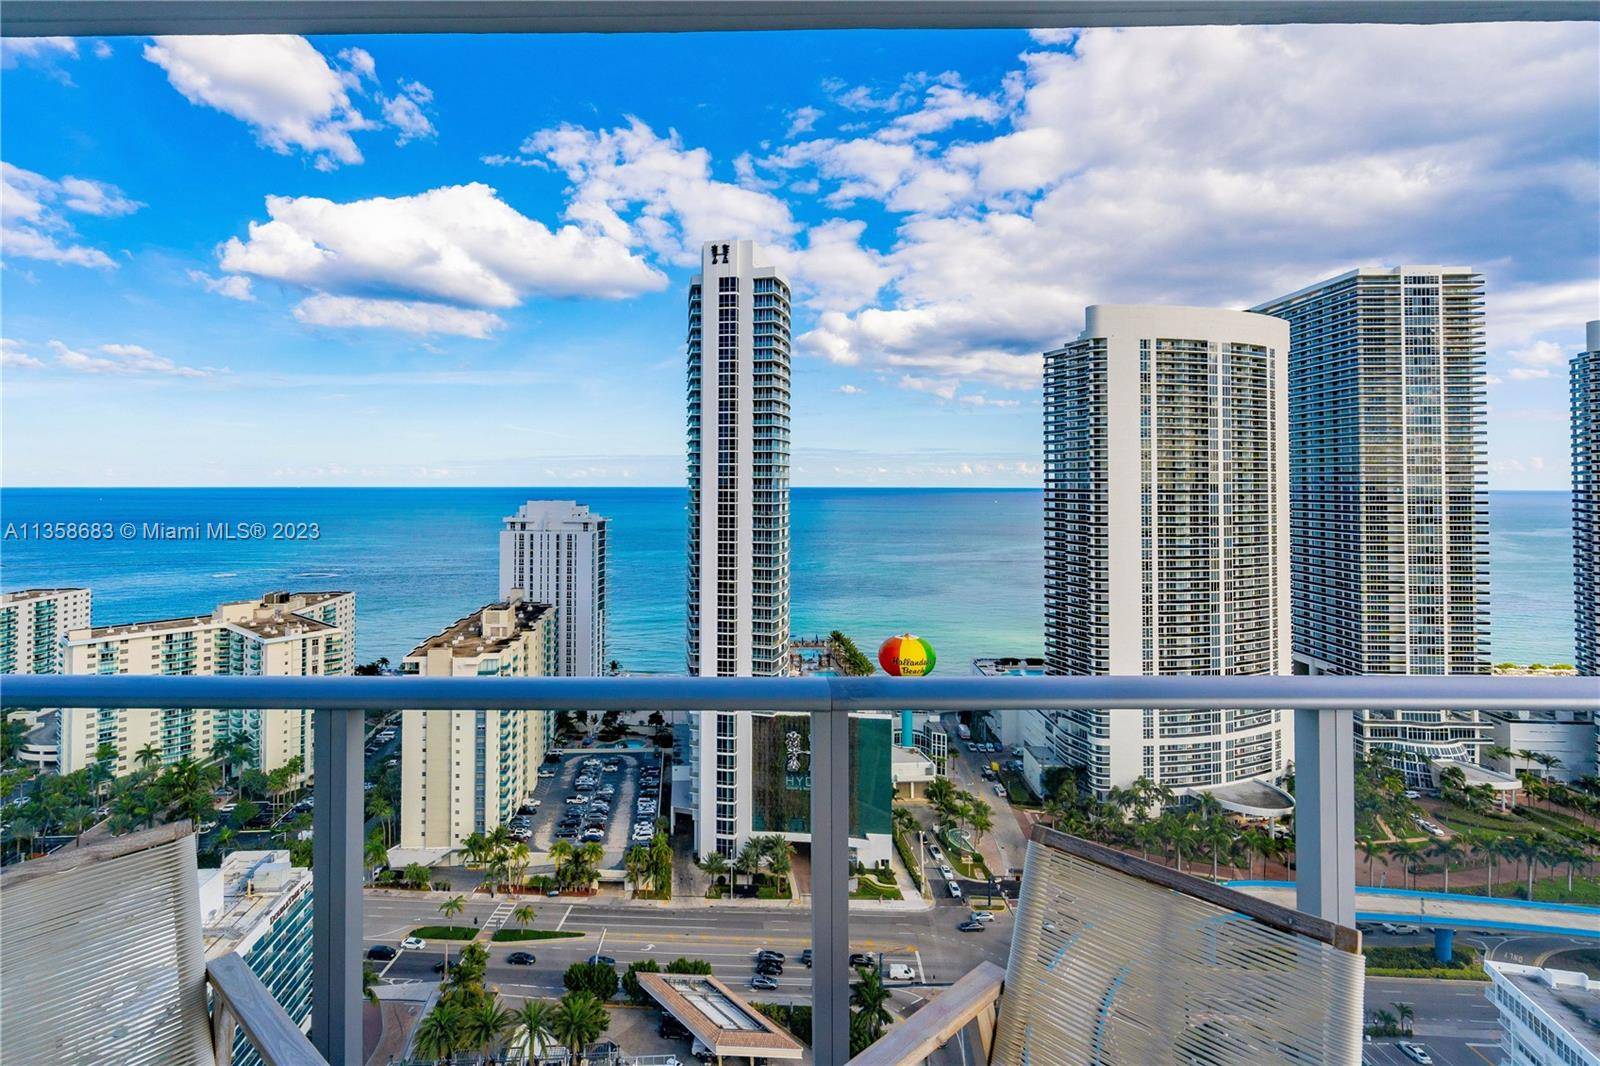 Brand new 2 bed 2 bath CORNER unit with beautiful views of the intracoastal, city, and ocean in a luxury high rise.